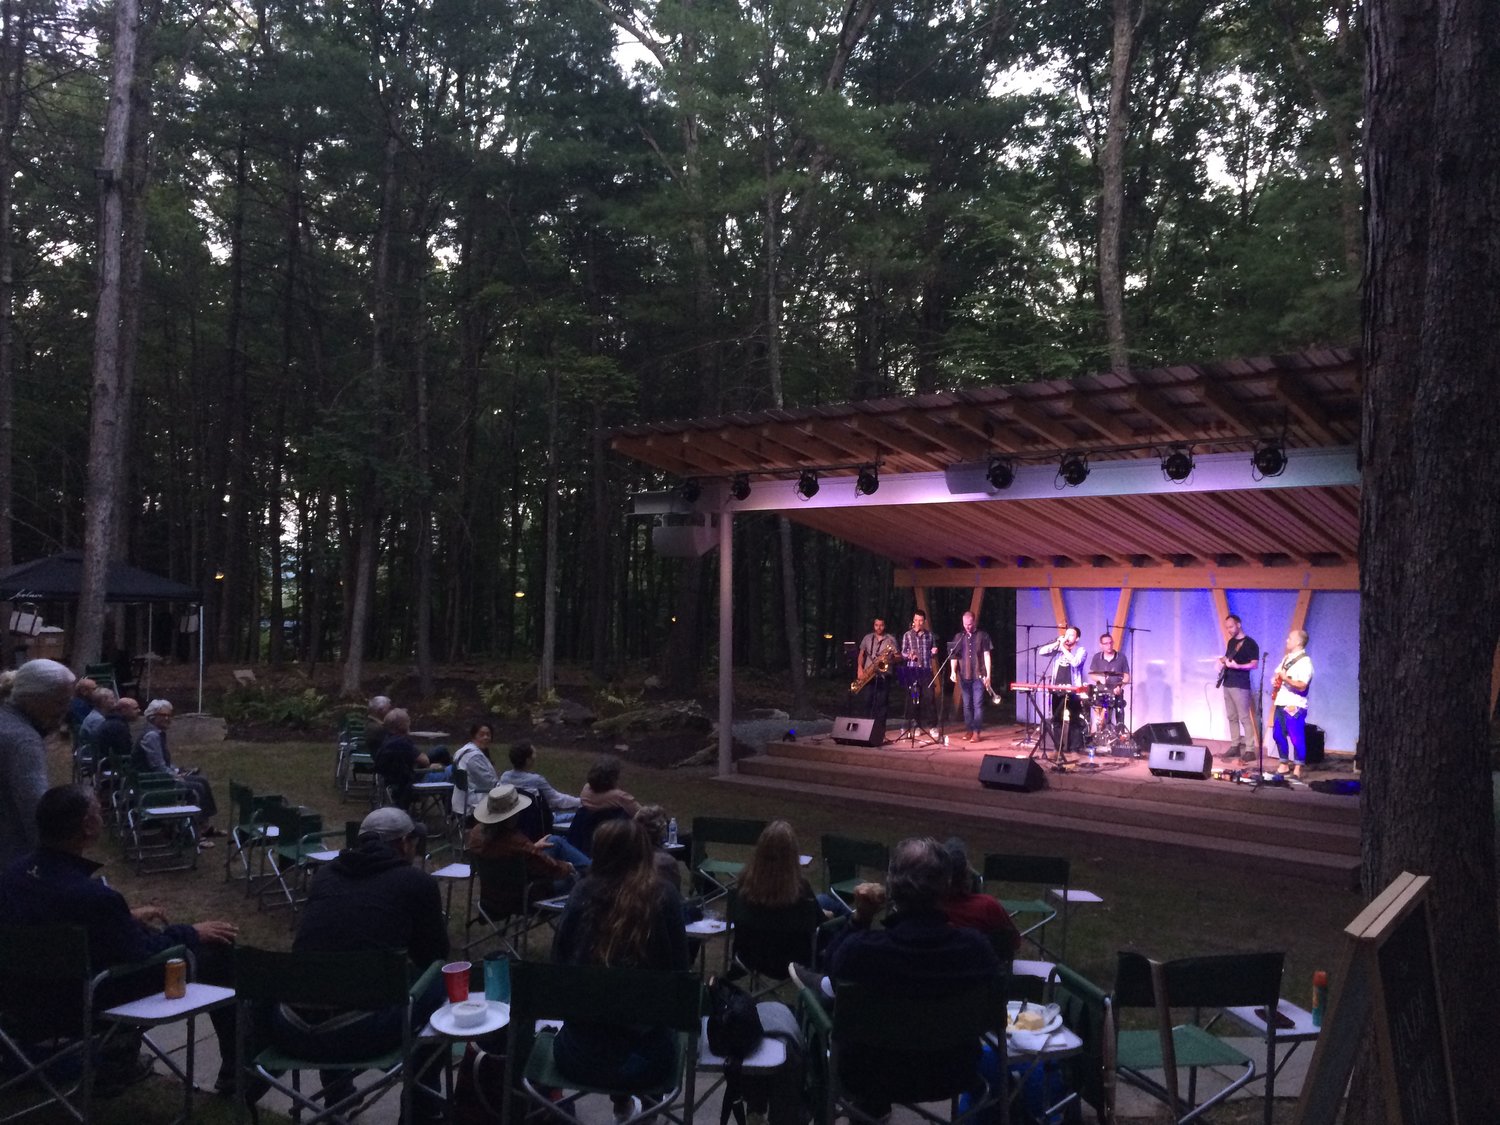 A performance last year at Harmony in the Woods.